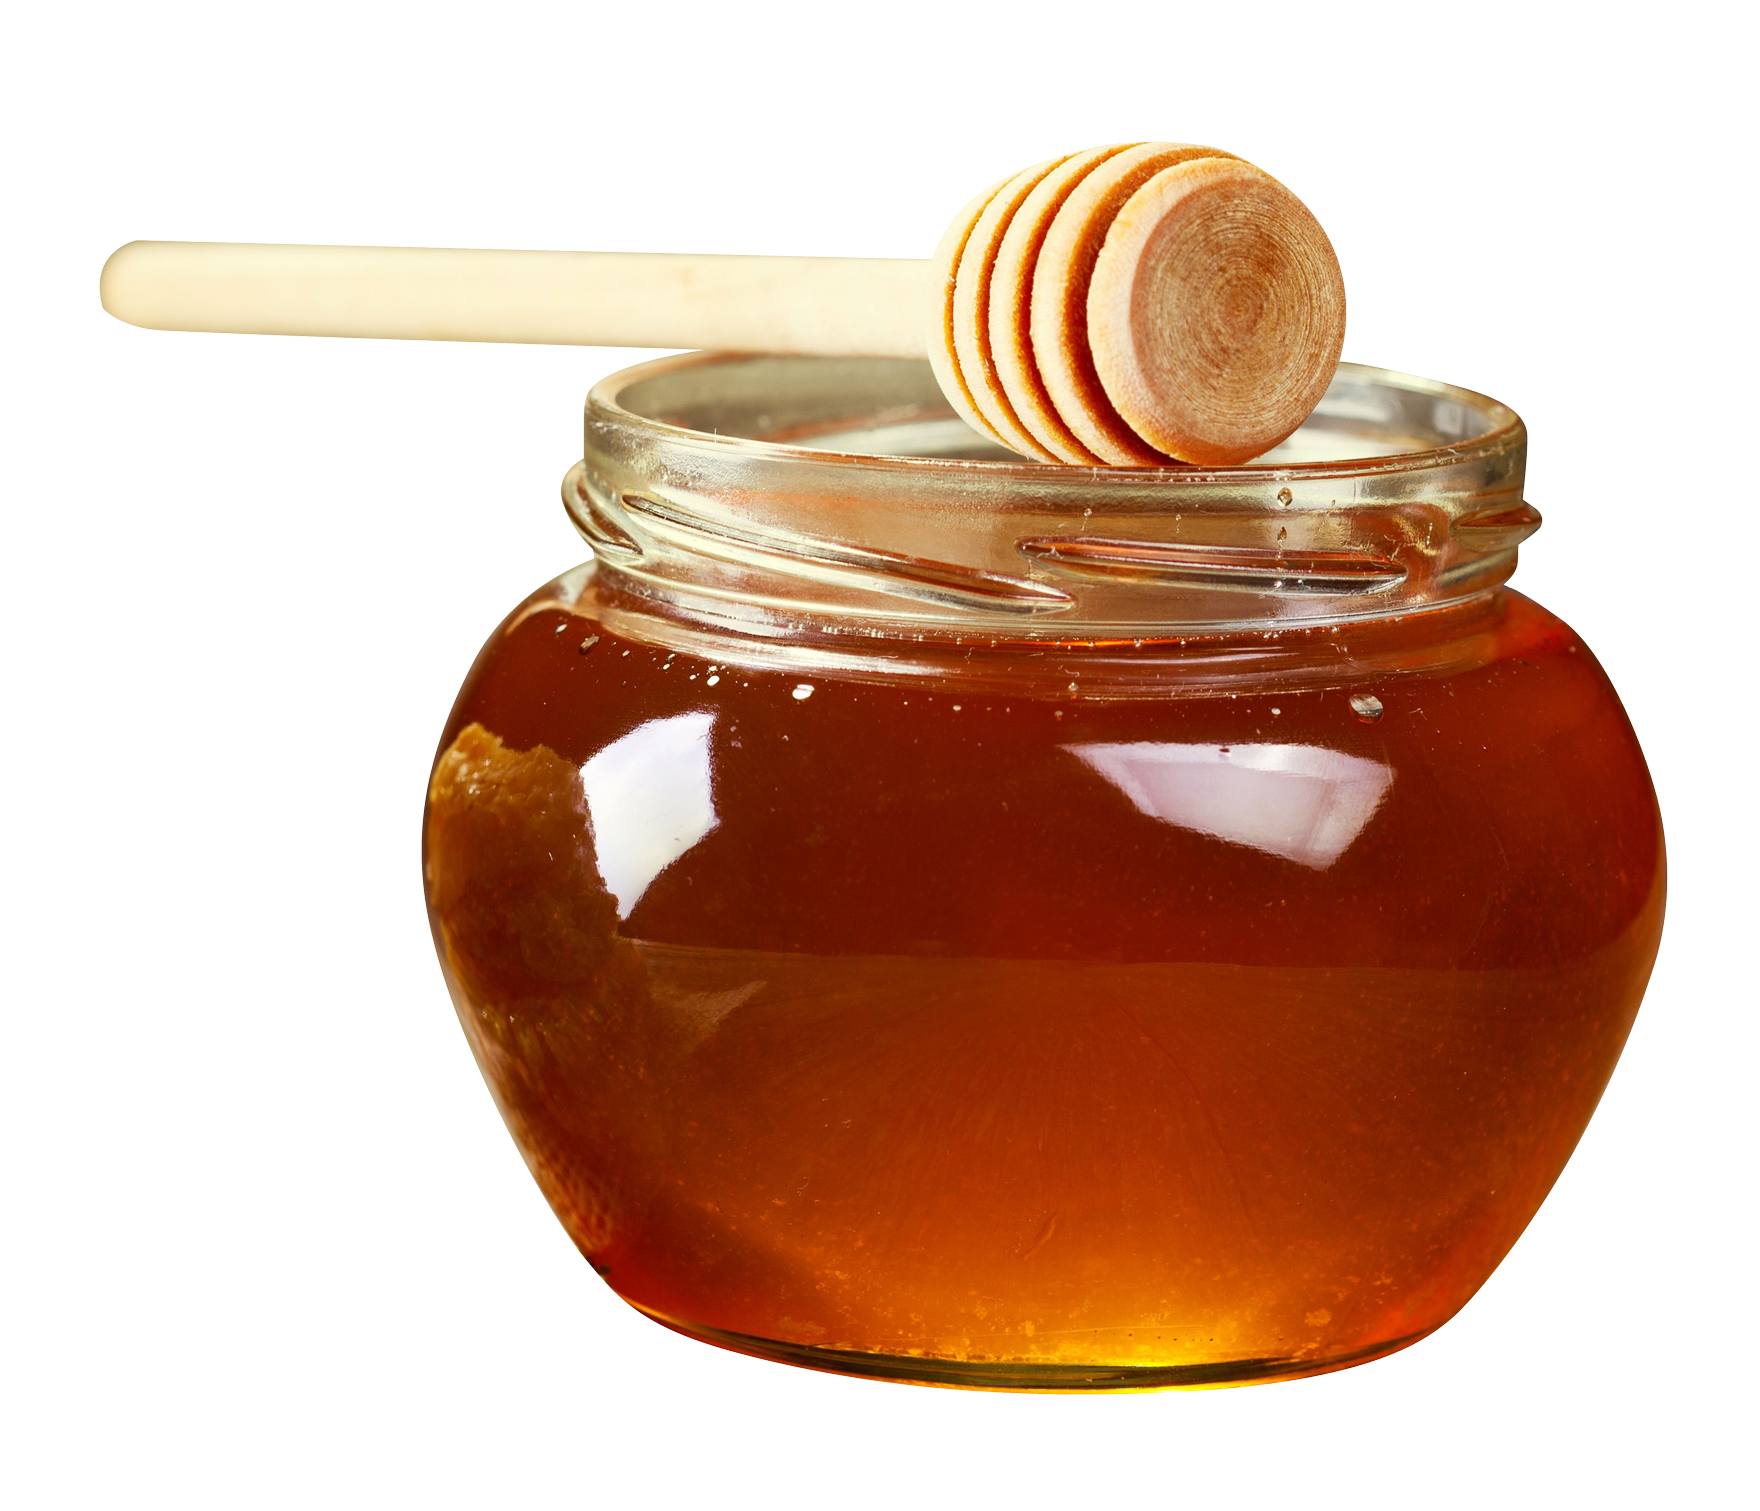 A Jar Of Honey With A Wooden Stick